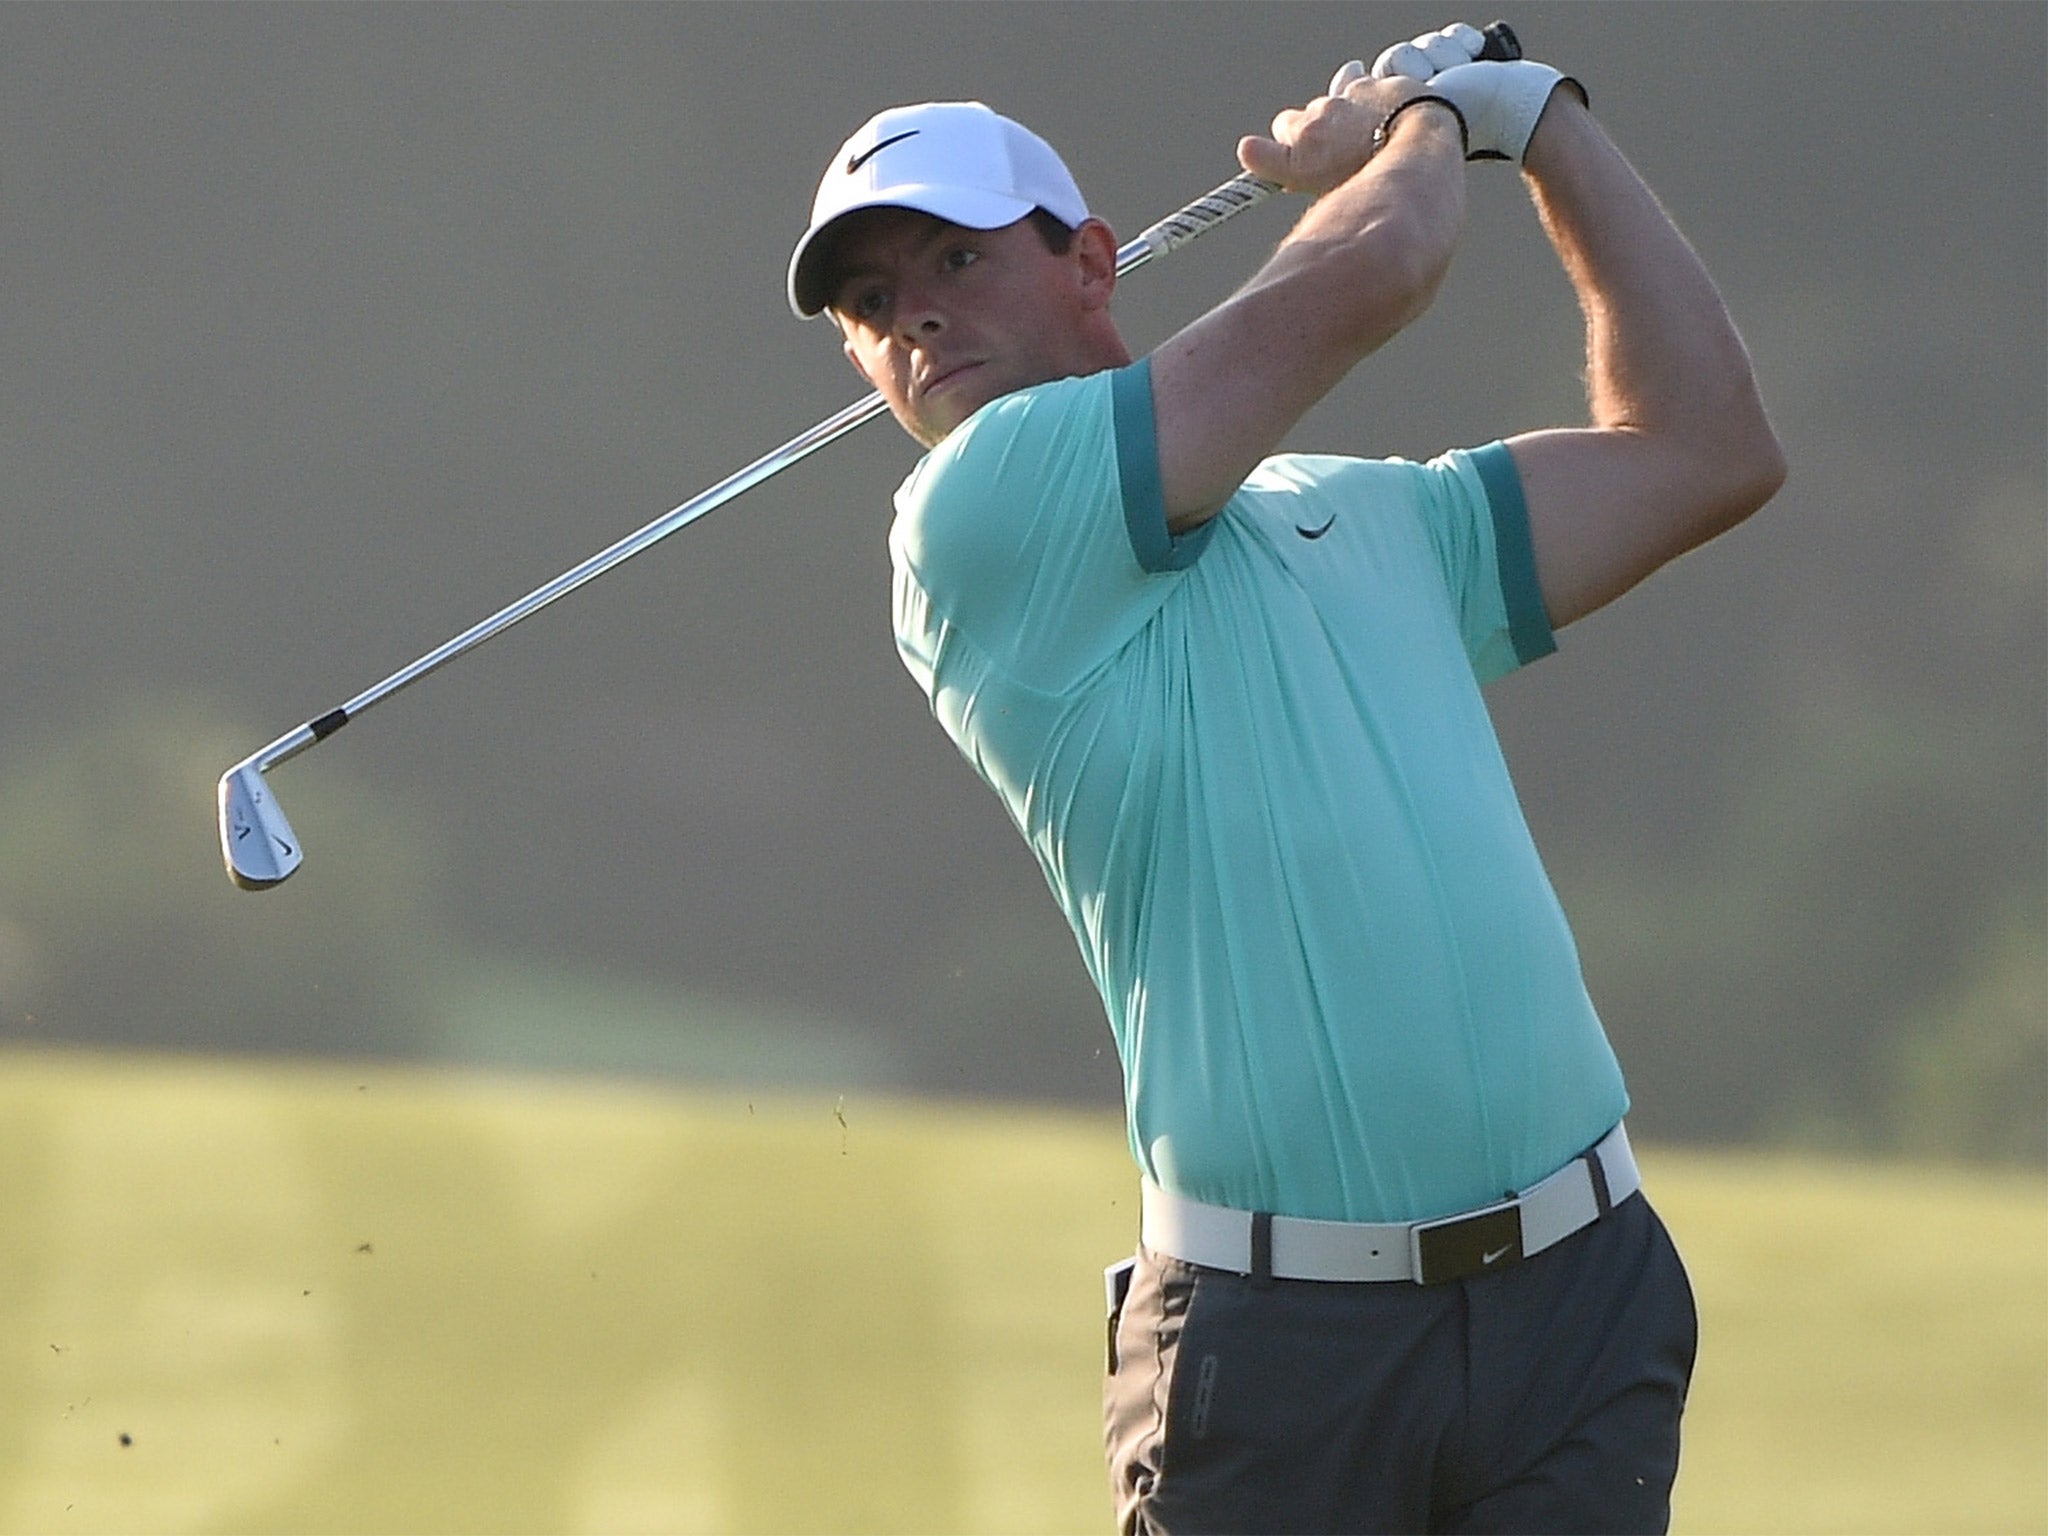 World No 1 Rory McIlroy has won two majors this year